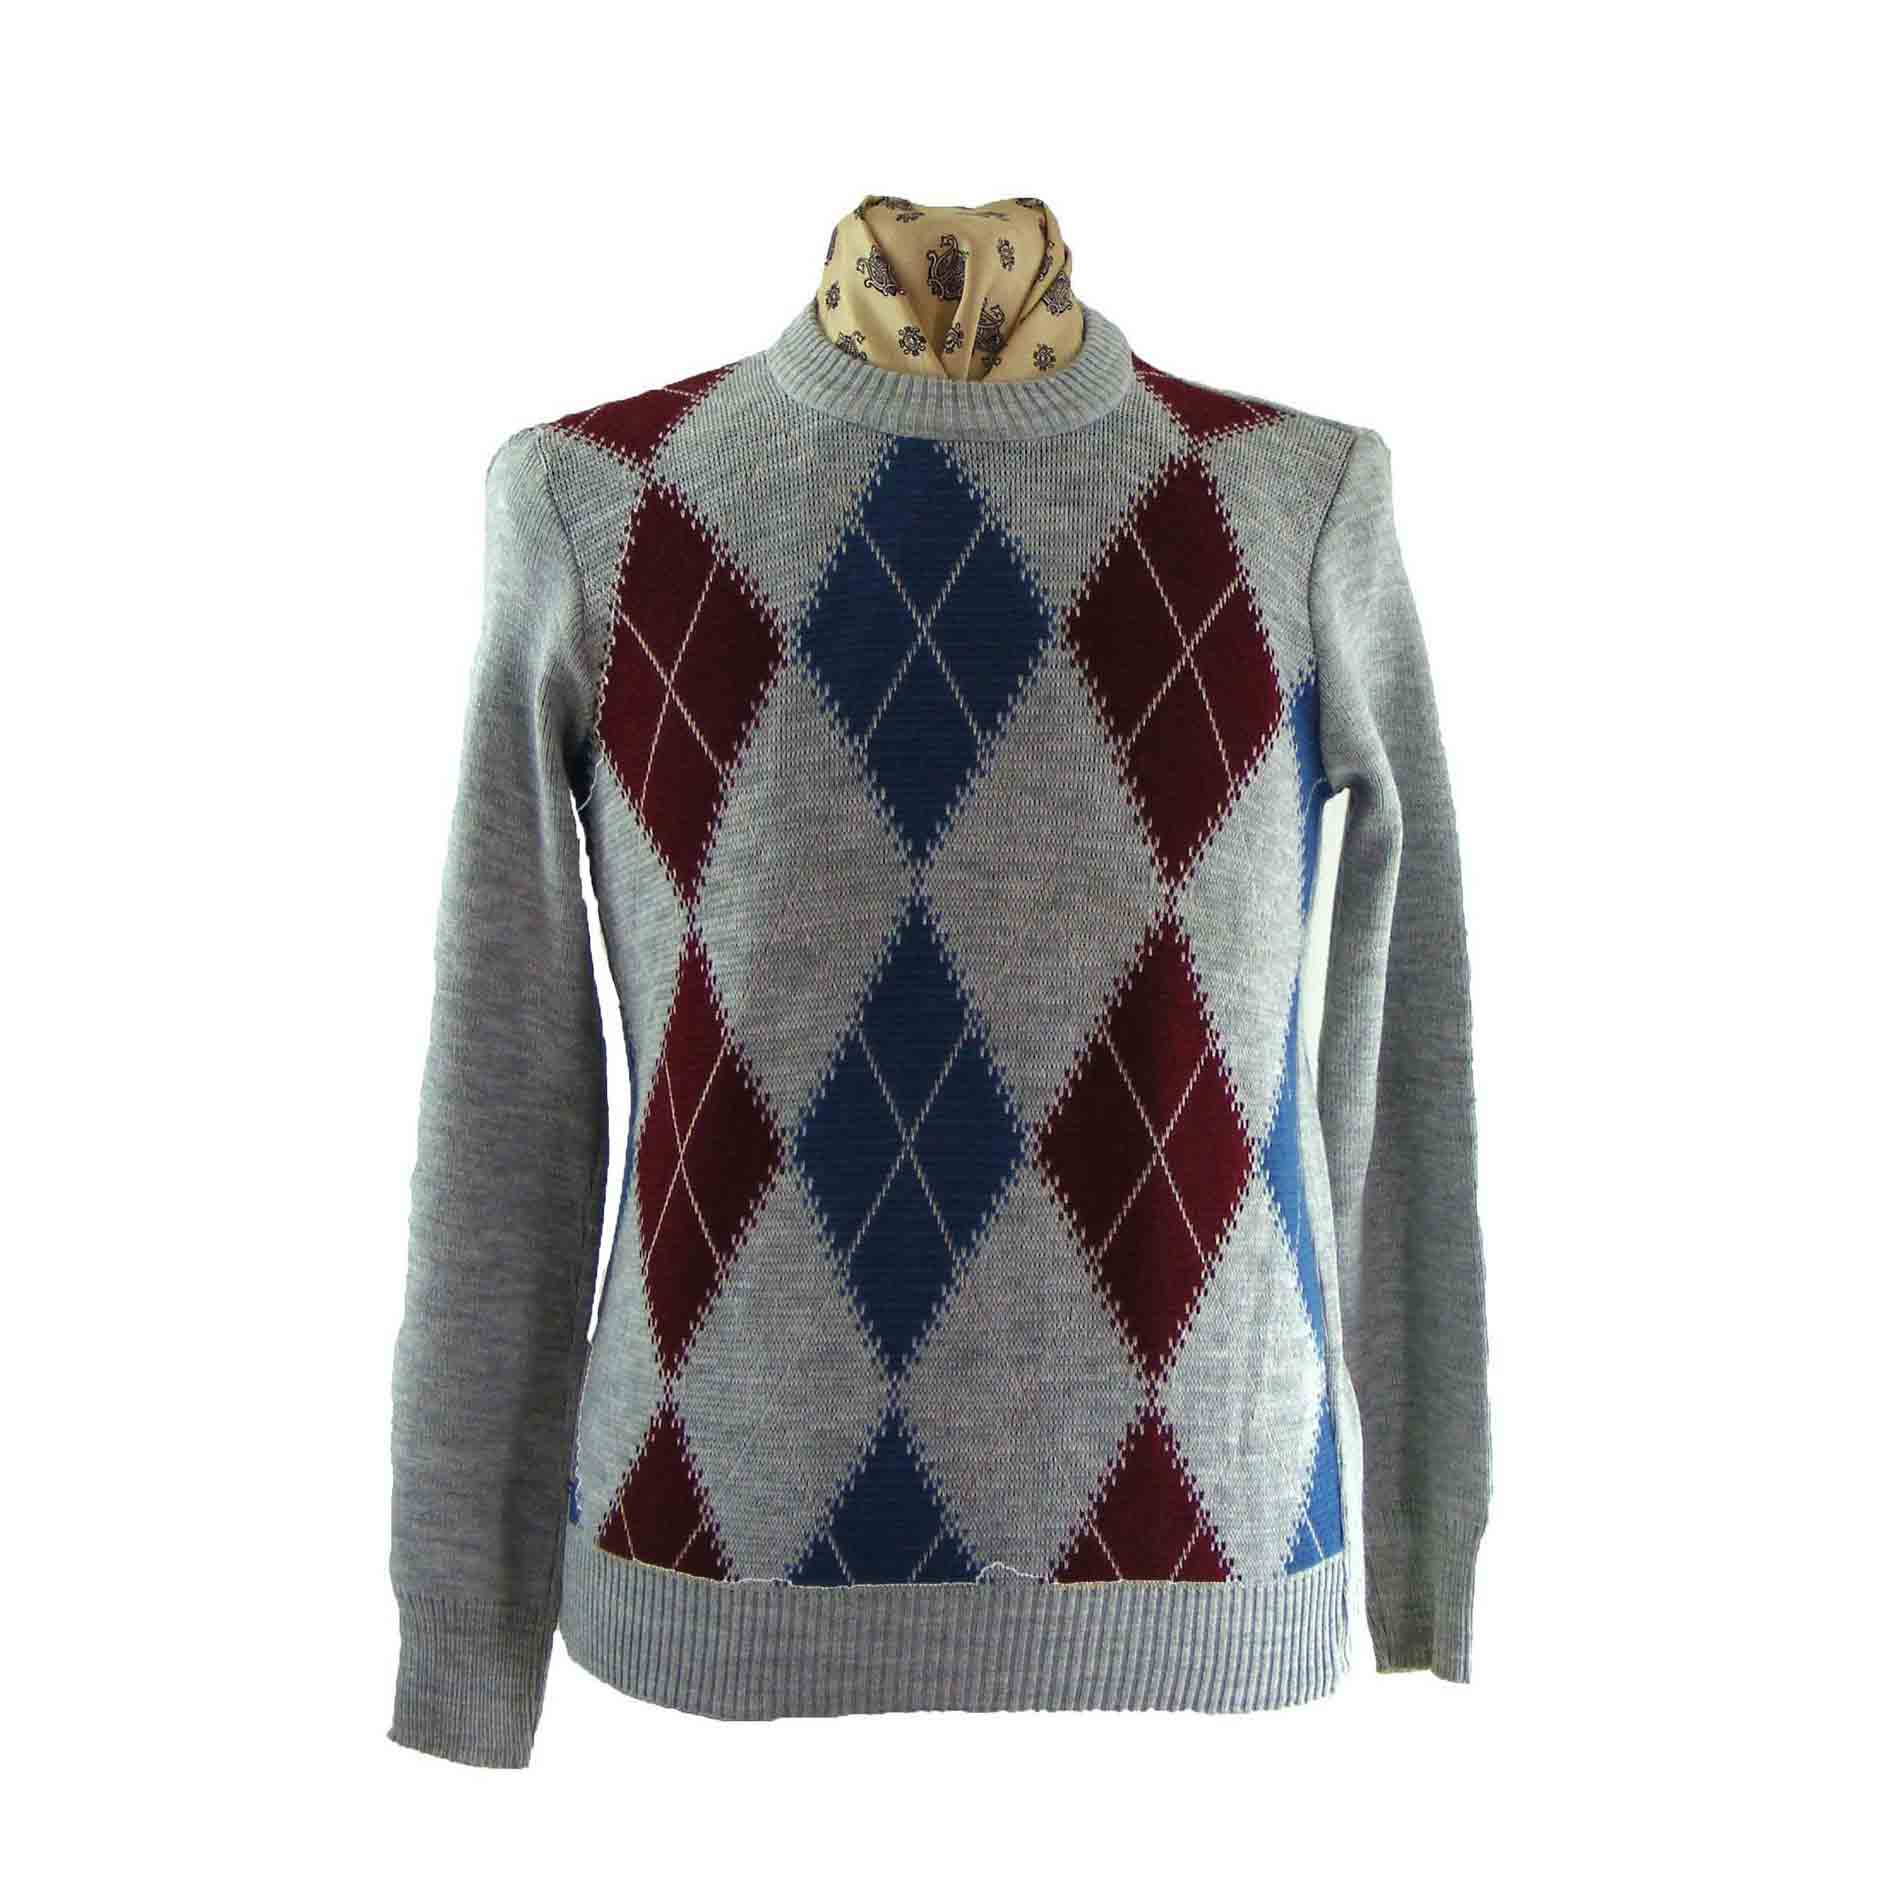 Multicolored jacquard sweater - Blue 17 Vintage Clothing